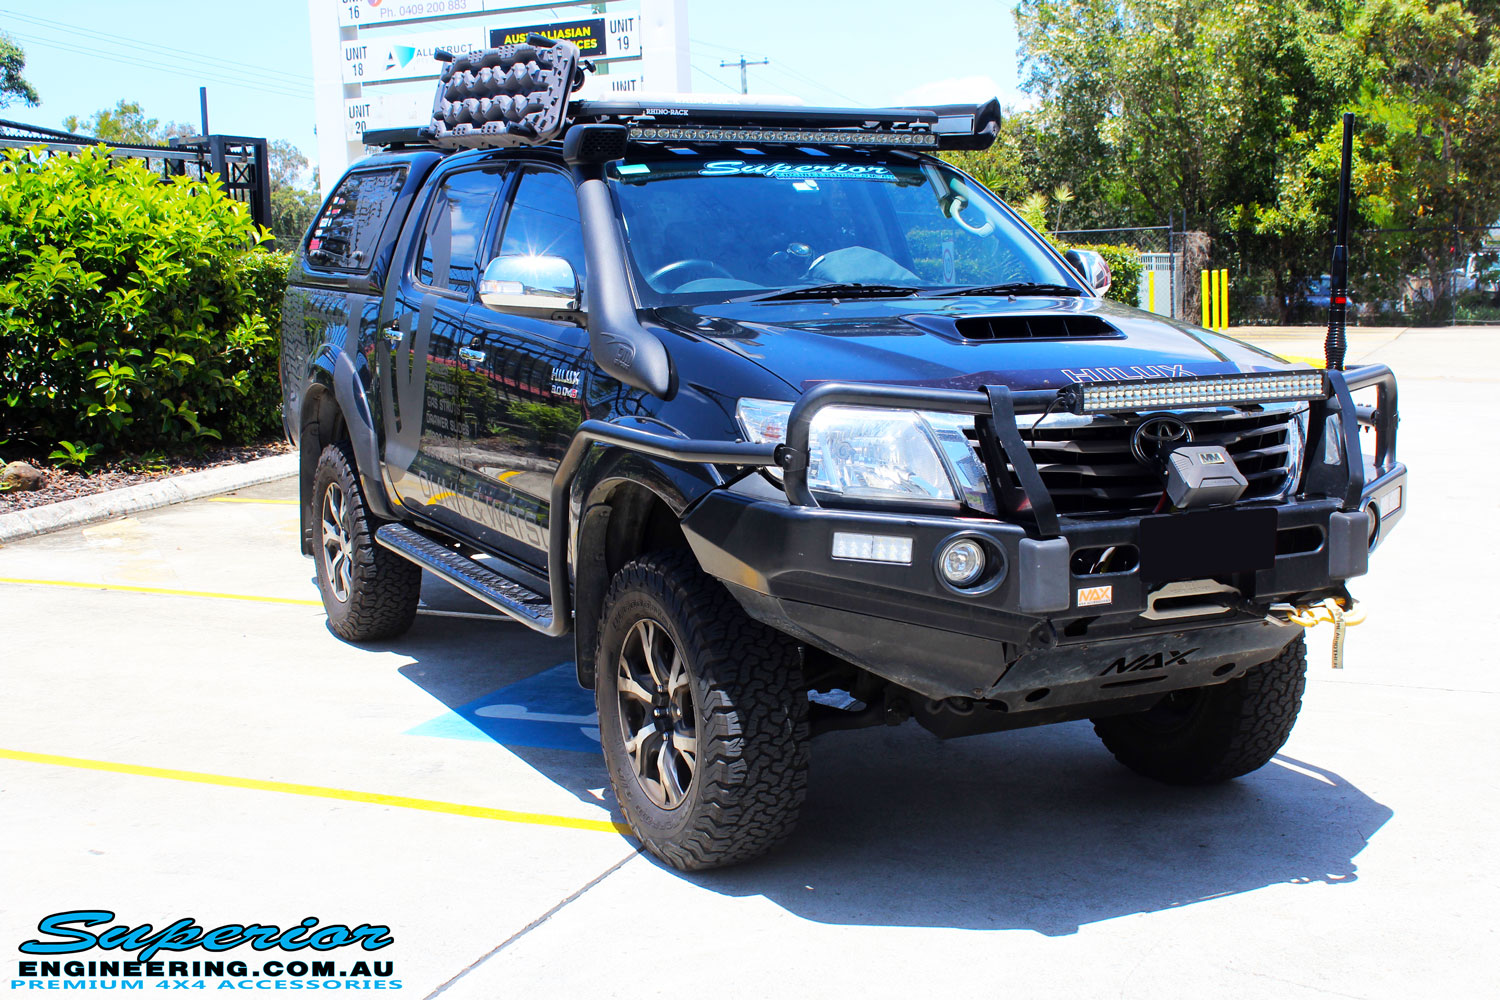 Right front side view of a Black Toyota Vigo Hilux after fitment of Superior Nitro Gas Front Struts, Coil Springs & GME Super Compact UHF CB with Antenna